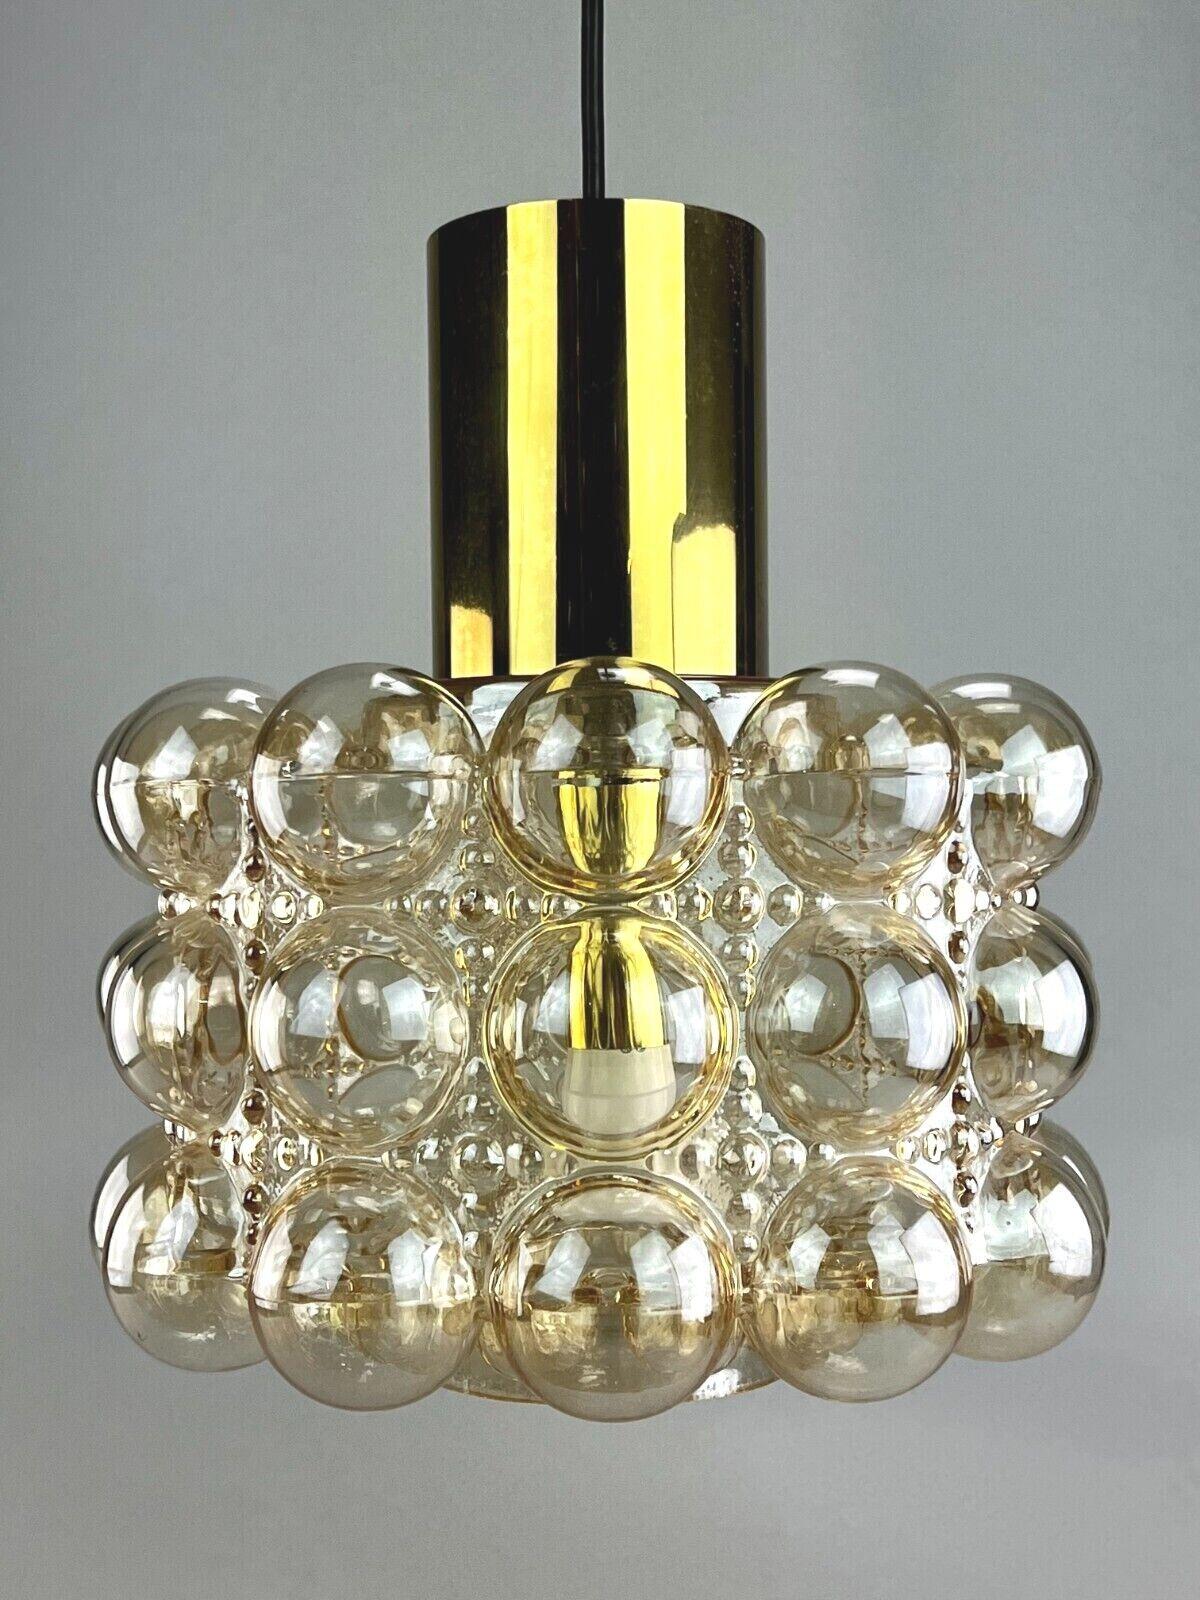 60s 70s lamp light ceiling lamp Helena Tynell Glashütte Limburg Bubble

Object: ceiling lamp

Manufacturer: Helena Tynell, Limburg

Condition: good

Age: around 1960-1970

Dimensions:

Diameter = 30cm
Height = 33cm

Other